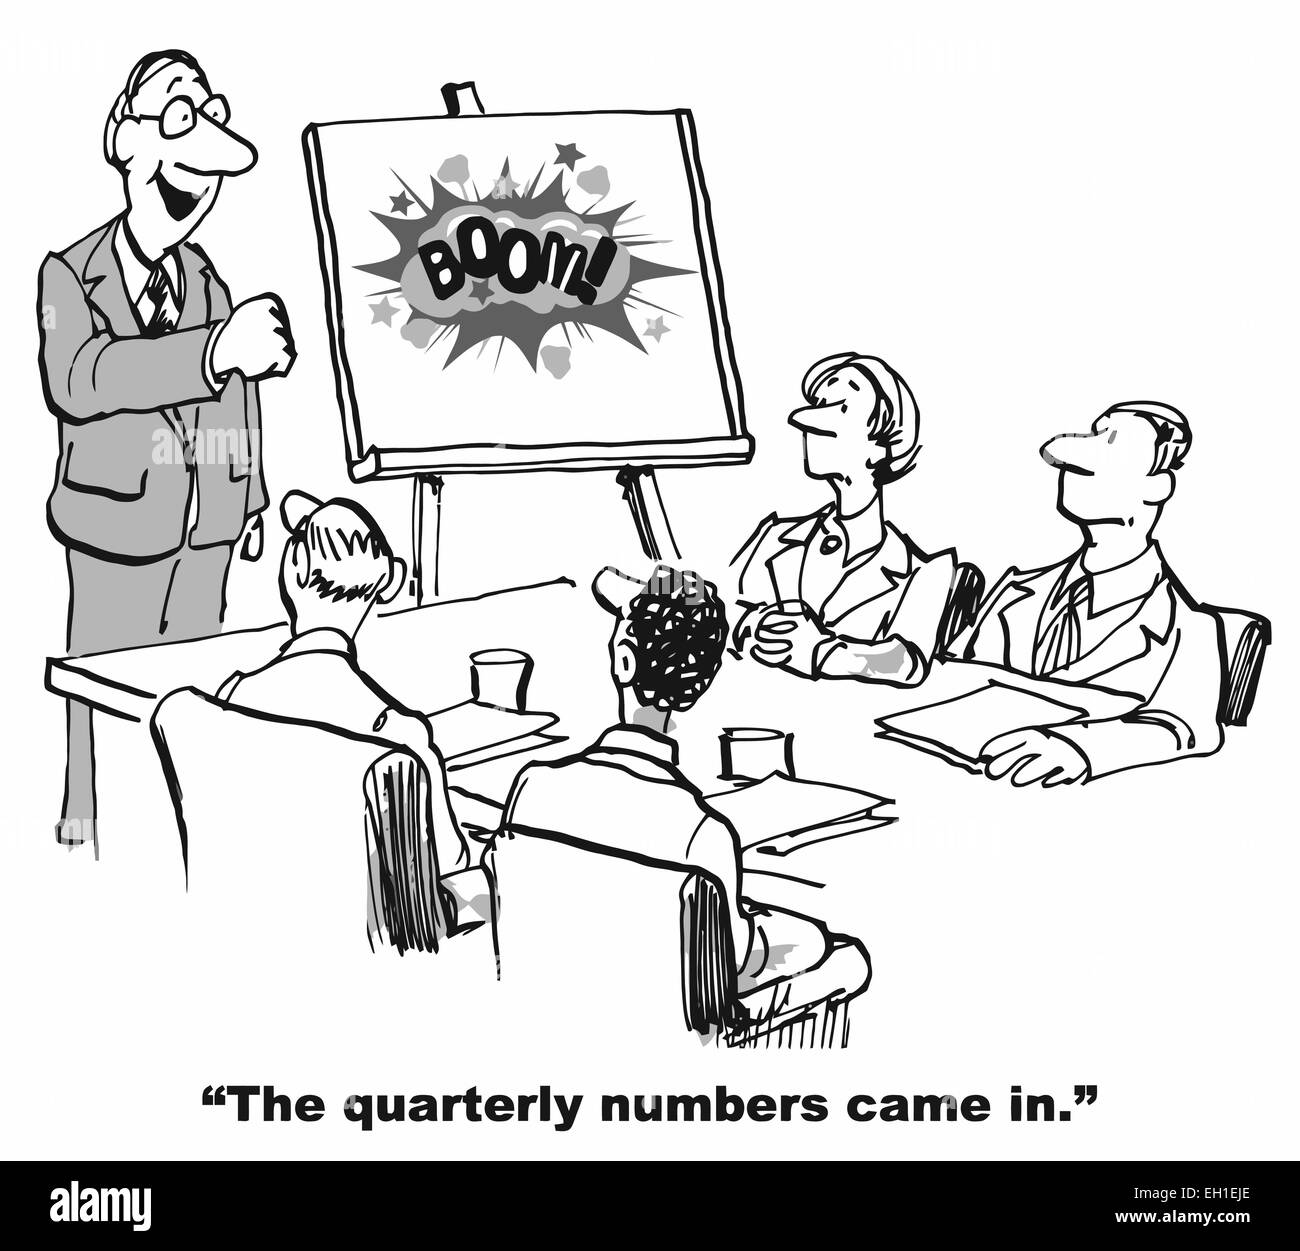 Cartoon of excellent business success, the quarterly numbers came in - BOOM! Stock Vector